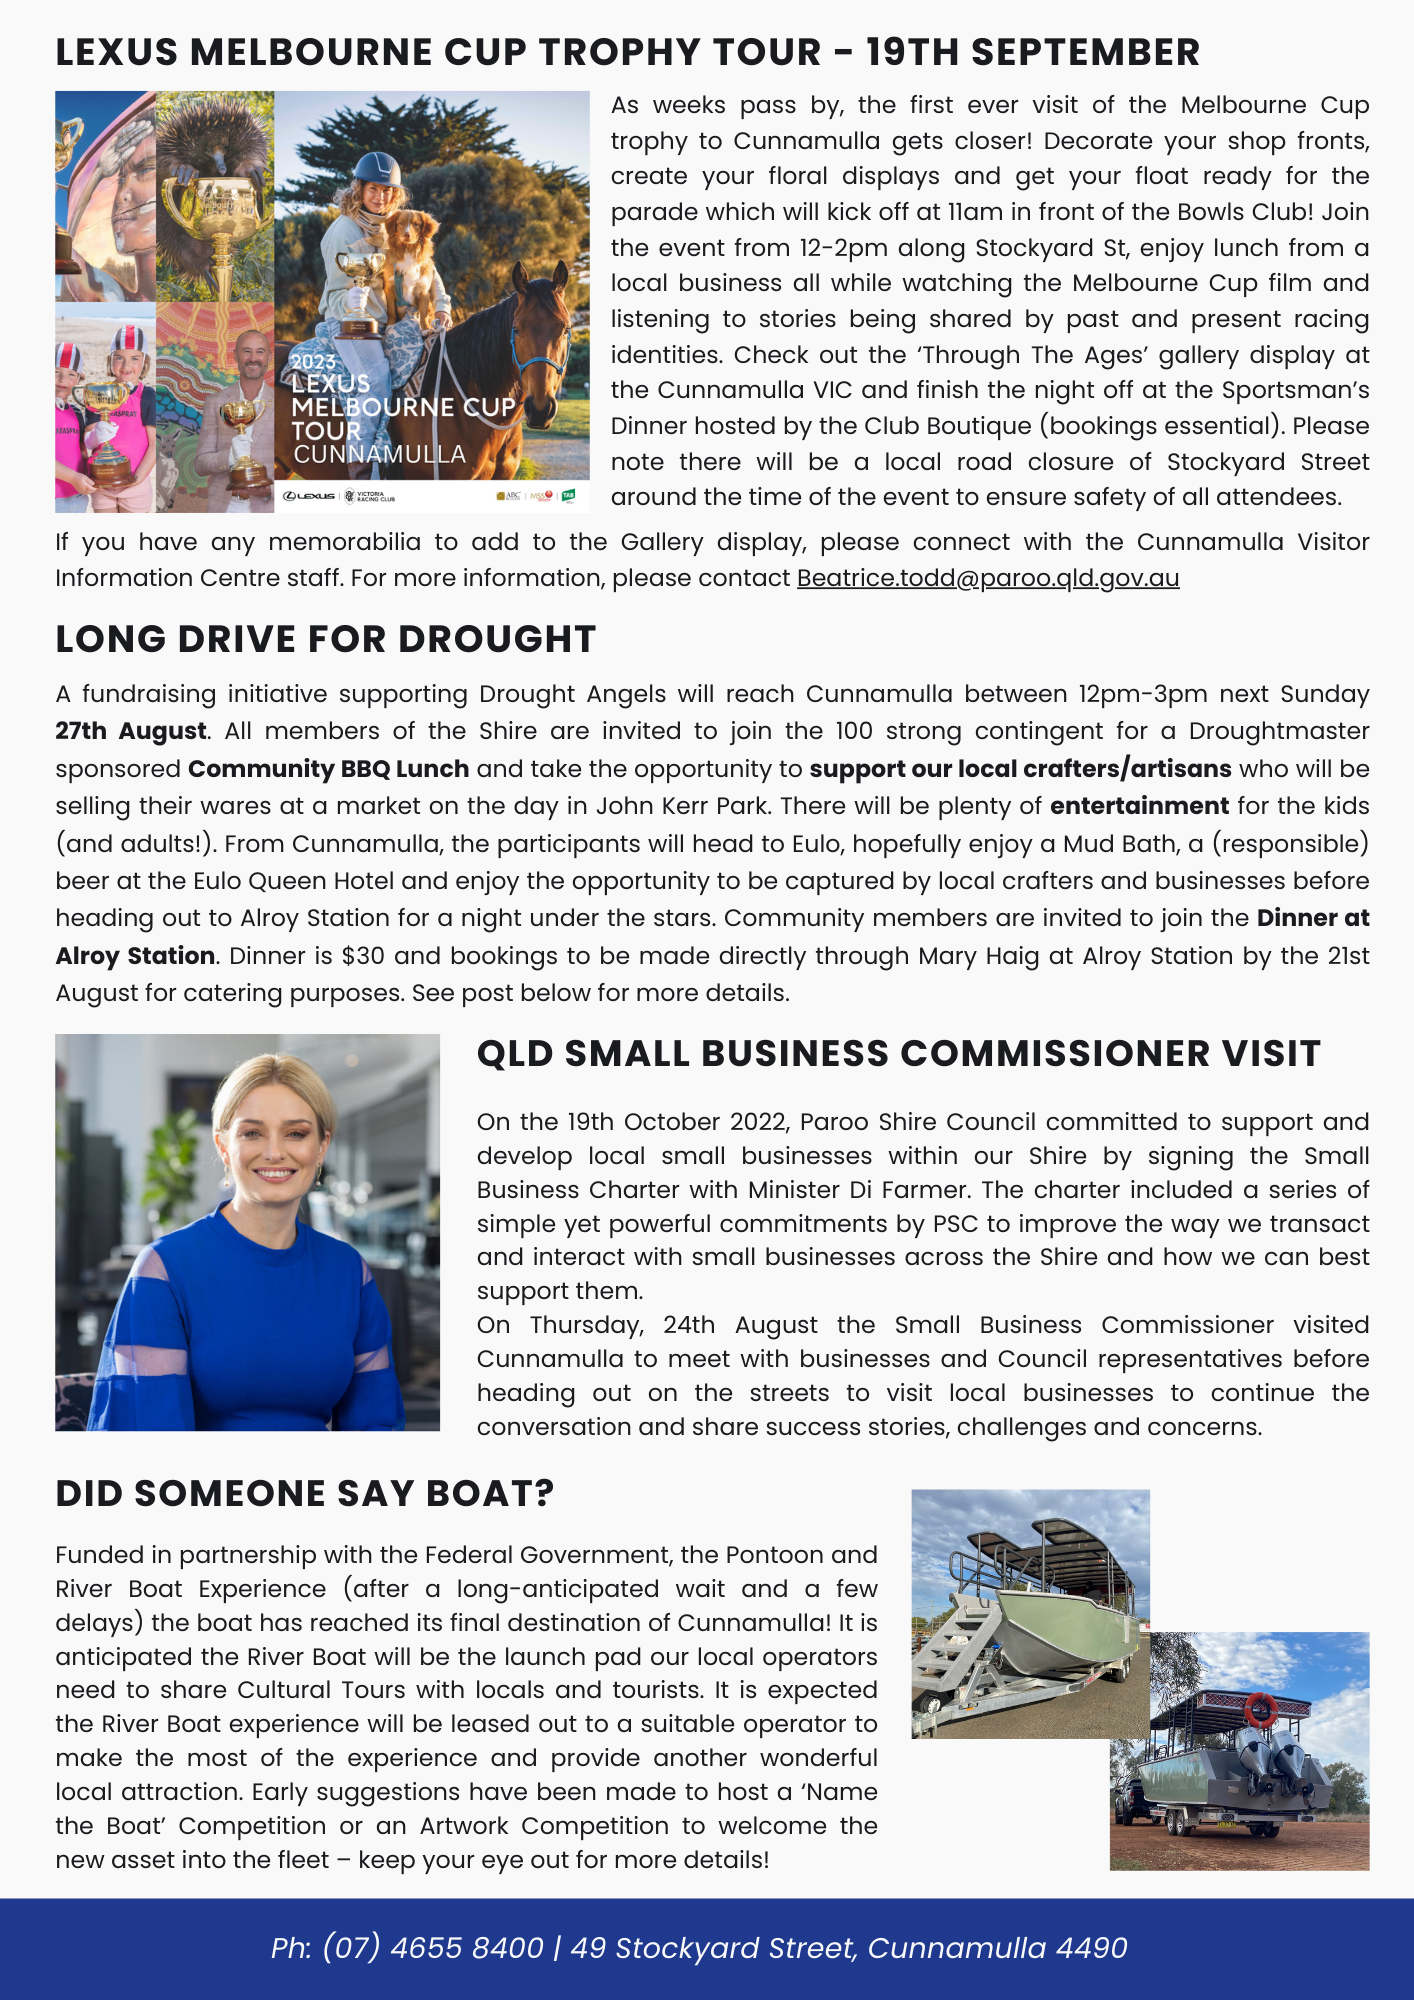 August Newsletter Page 2